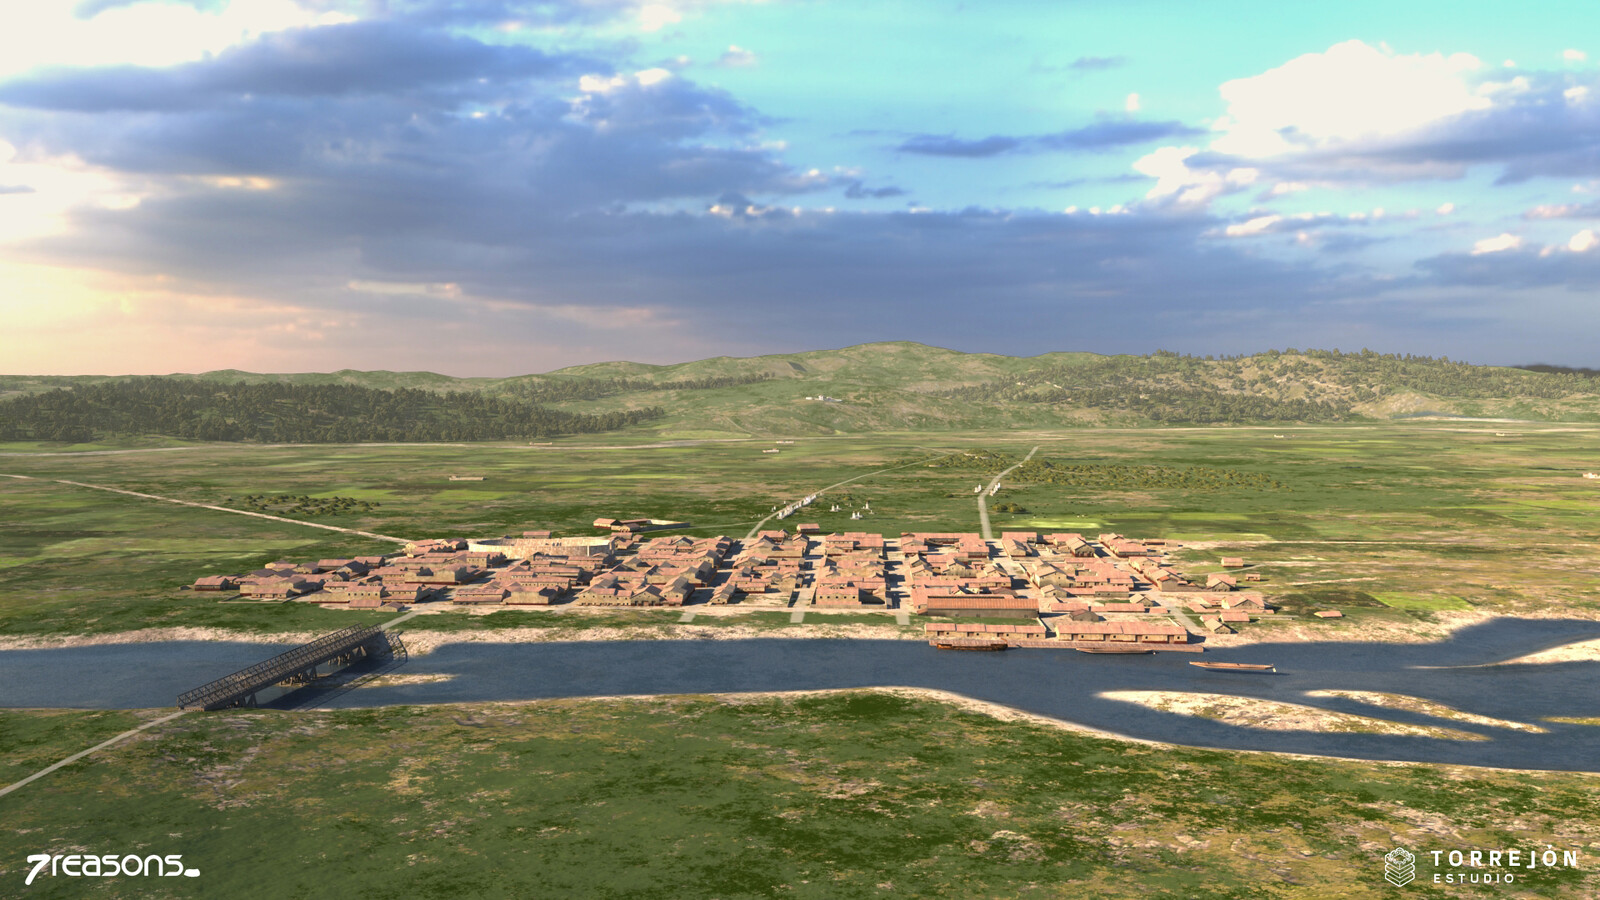 3D visualisation of Flavia Solva and its landscape in Roman times.